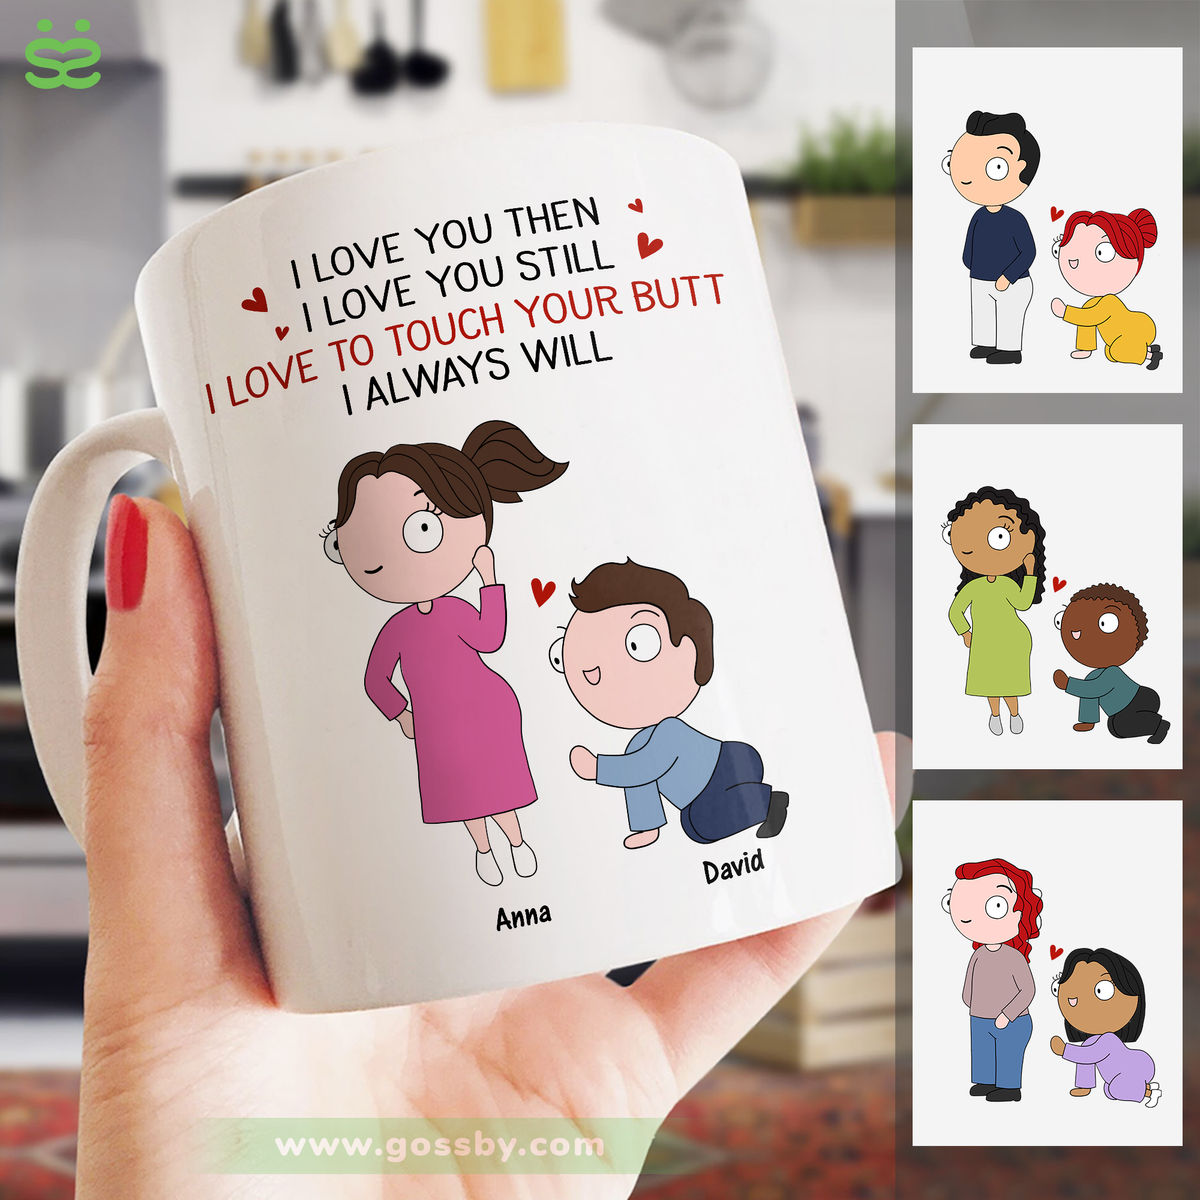 Personalized Mug - Funny Couple - I love you then I love you still I love to touch your butt I always will